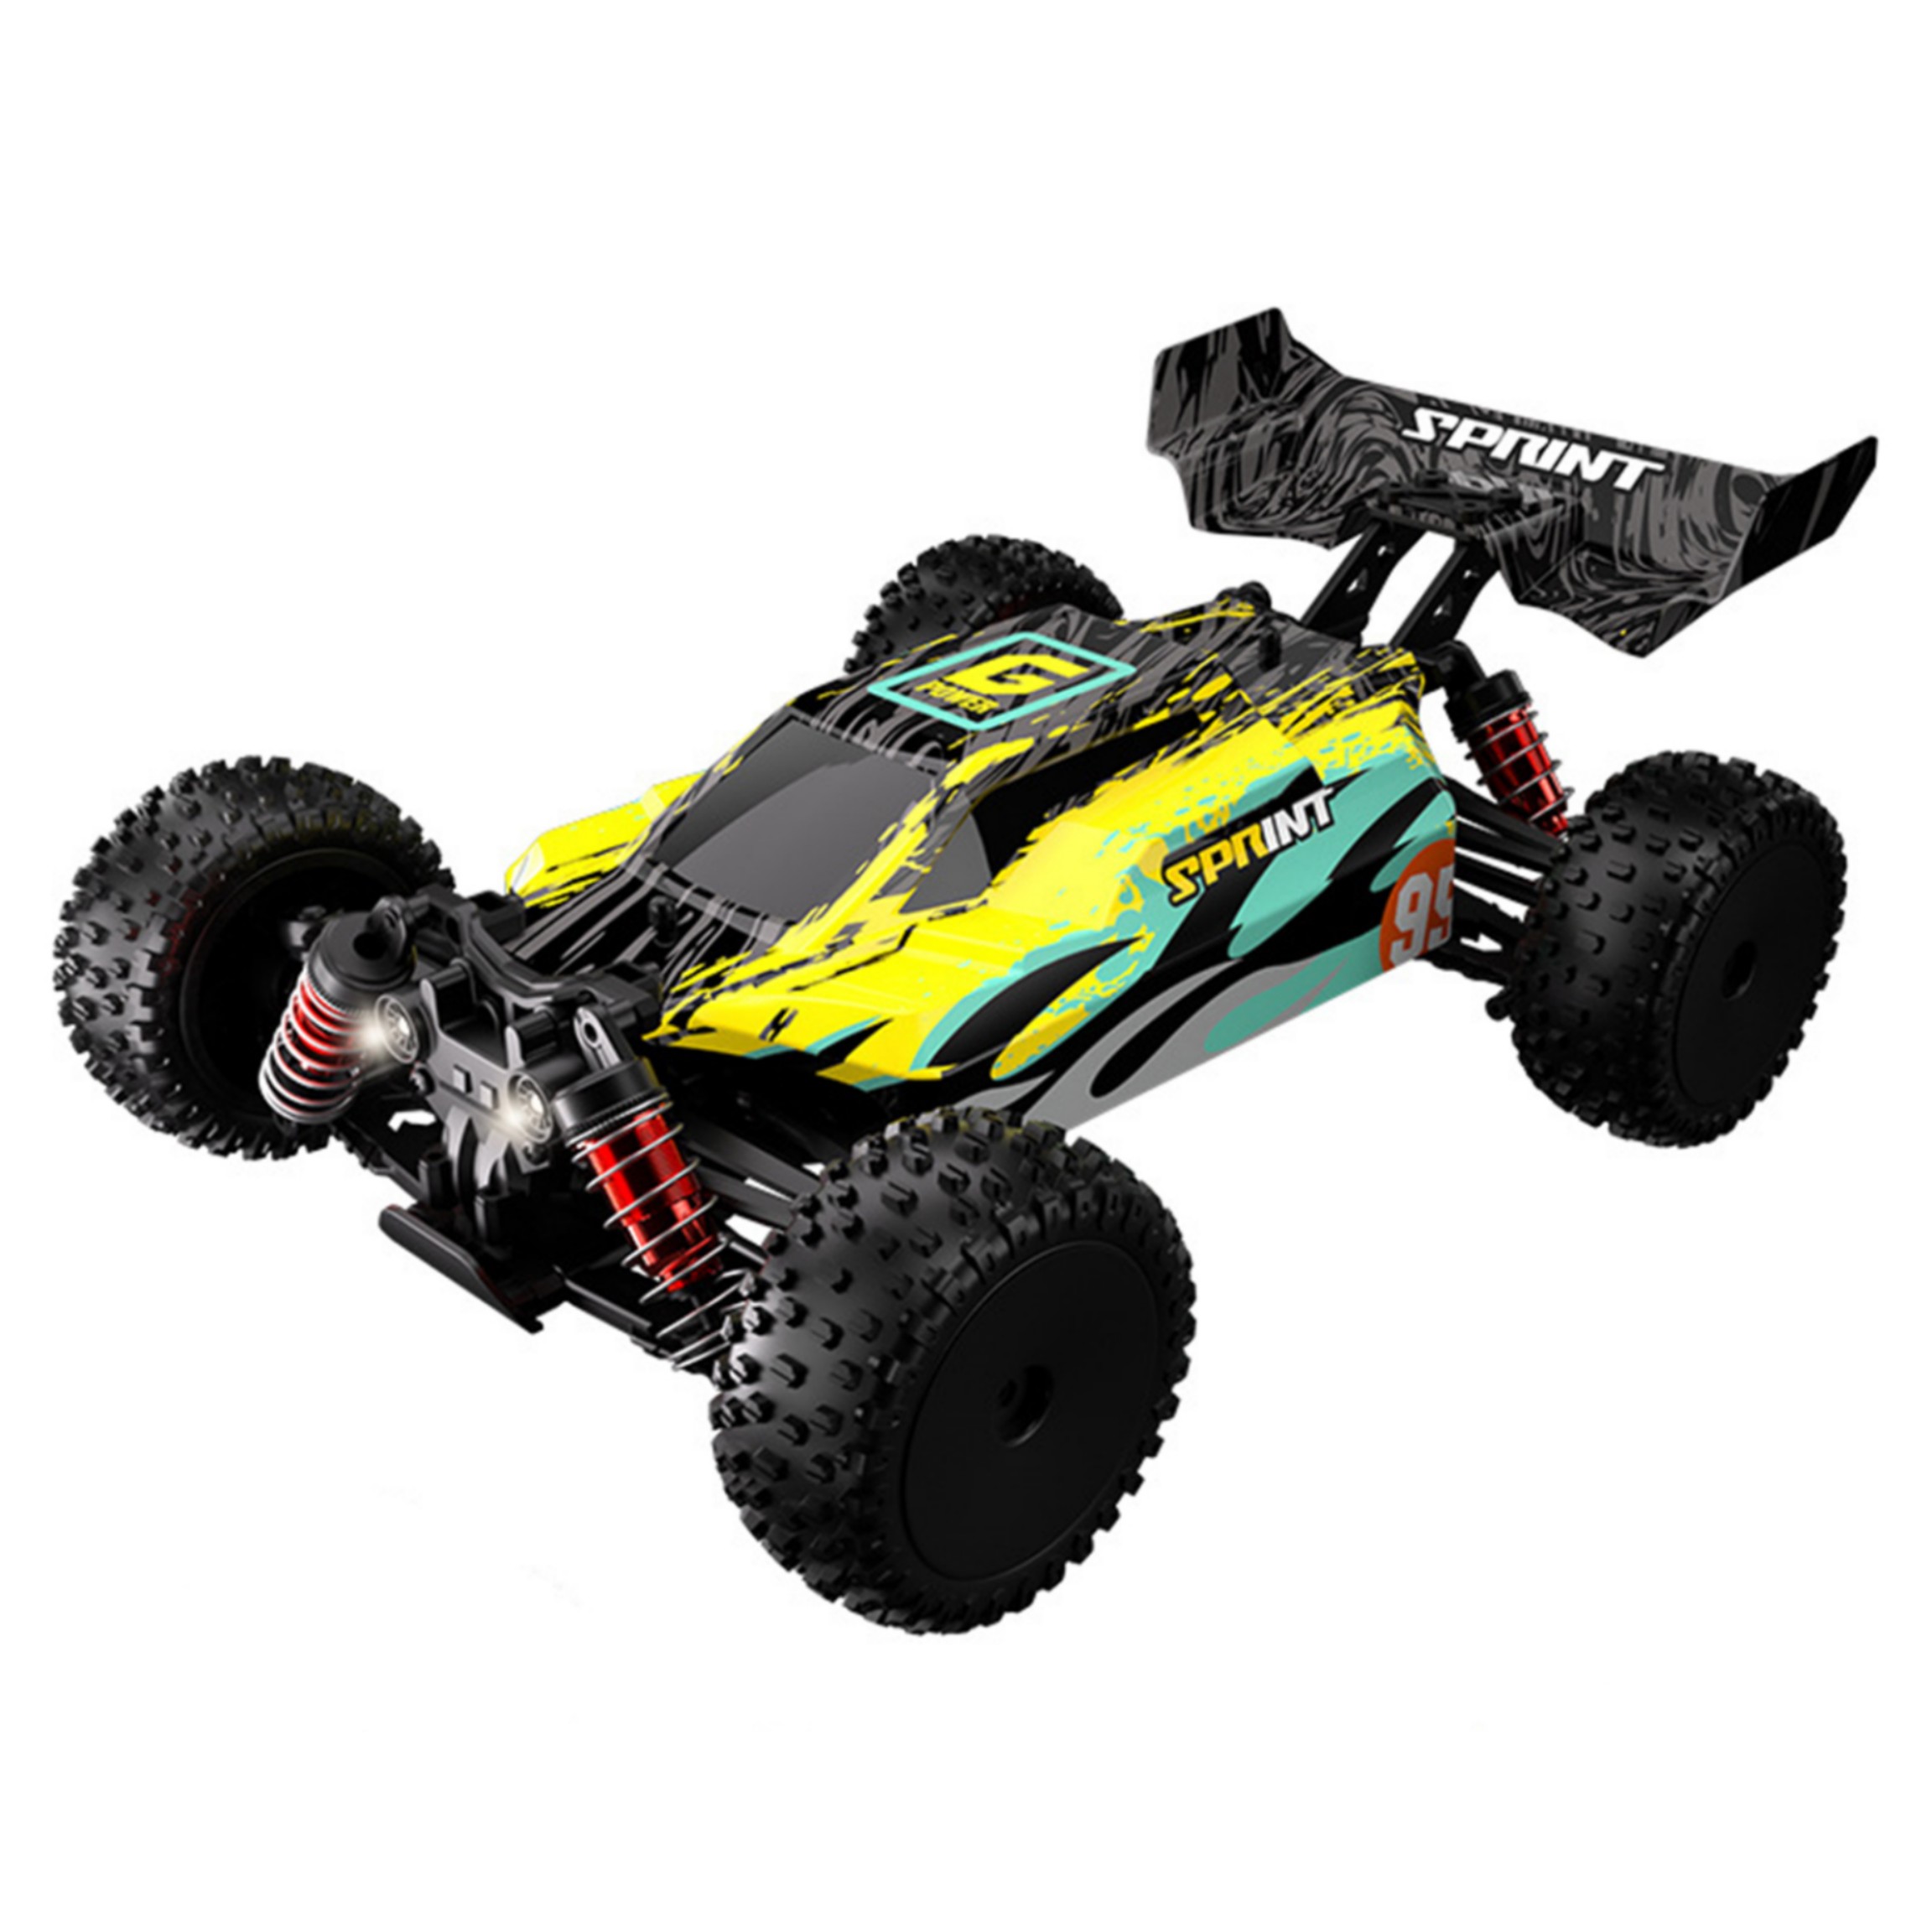 2.4G Remote Control Car 1:16 Full-scale 4WD Off-road Vehicle 36km/h High Speed Racing Car Model Toys G169 Green